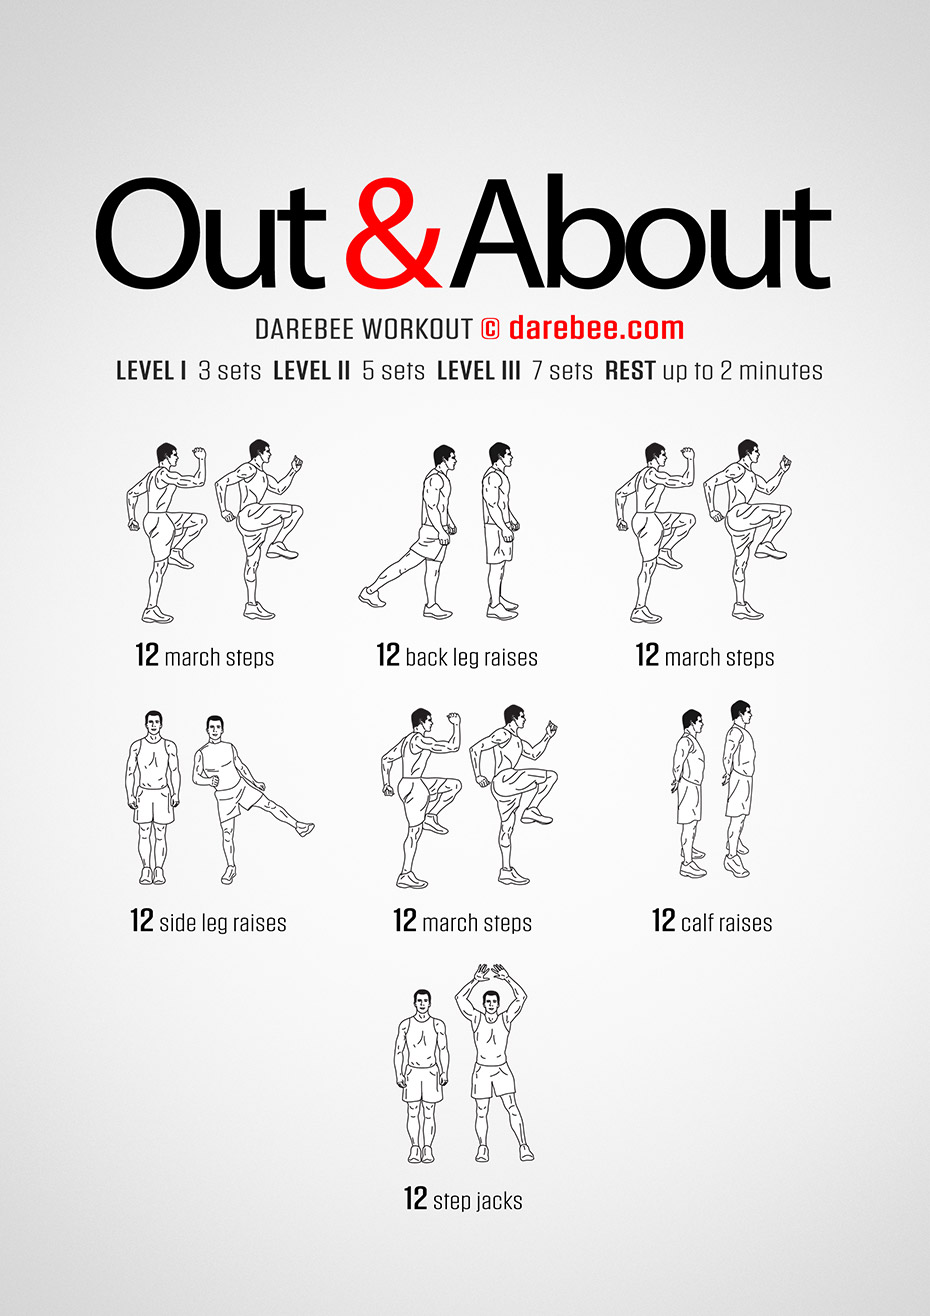 Out & About is a DAREBEE home fitness workout that provides a home cardio and walking , low-impact workout you can do at home with next to zero required space.